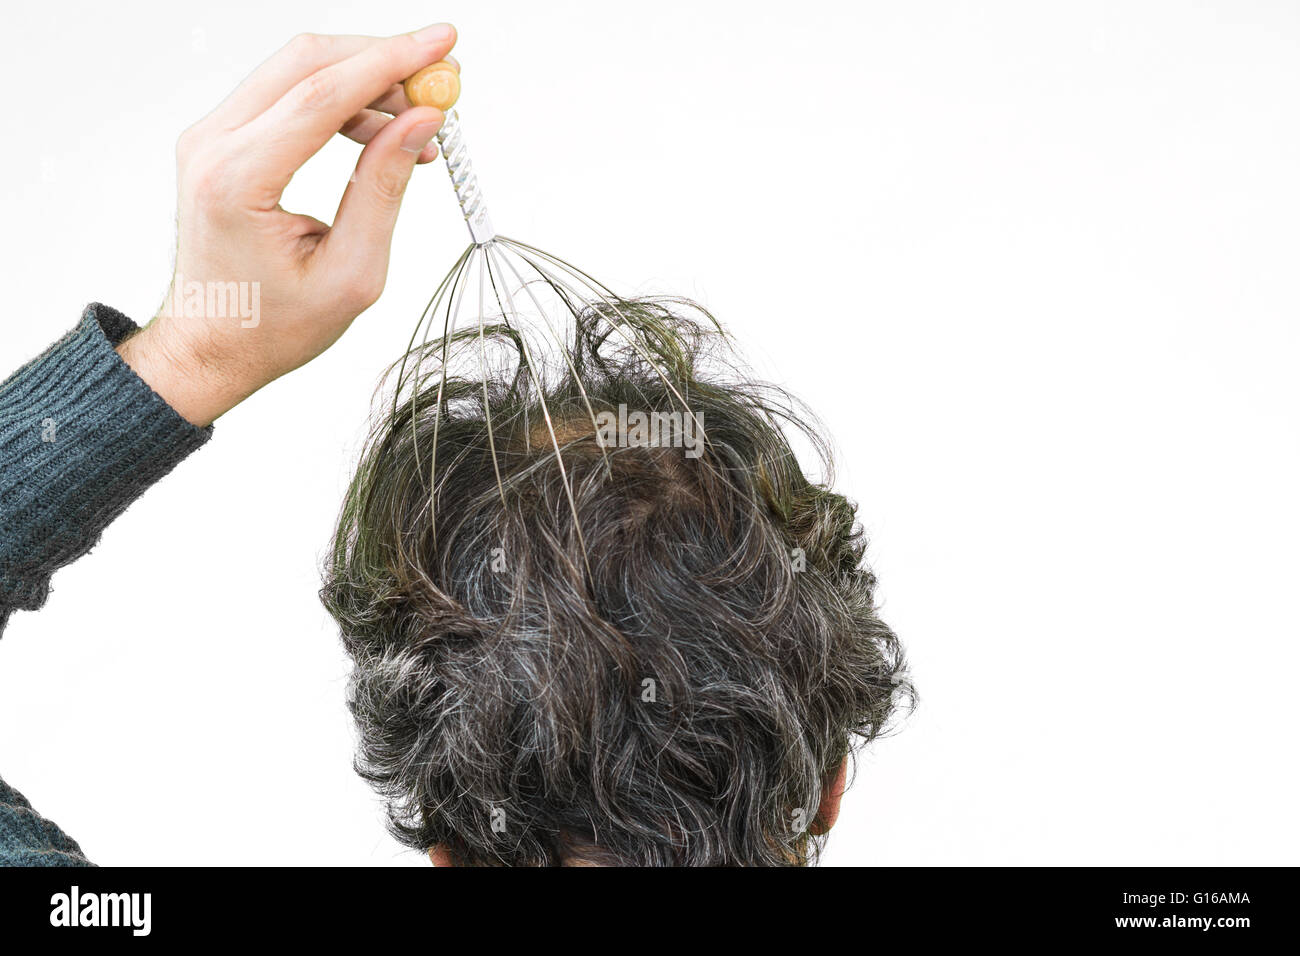 Man relaxes with the Genie head massager. Alternative Therapy. Indian head massage tool, self head massager. Stock Photo